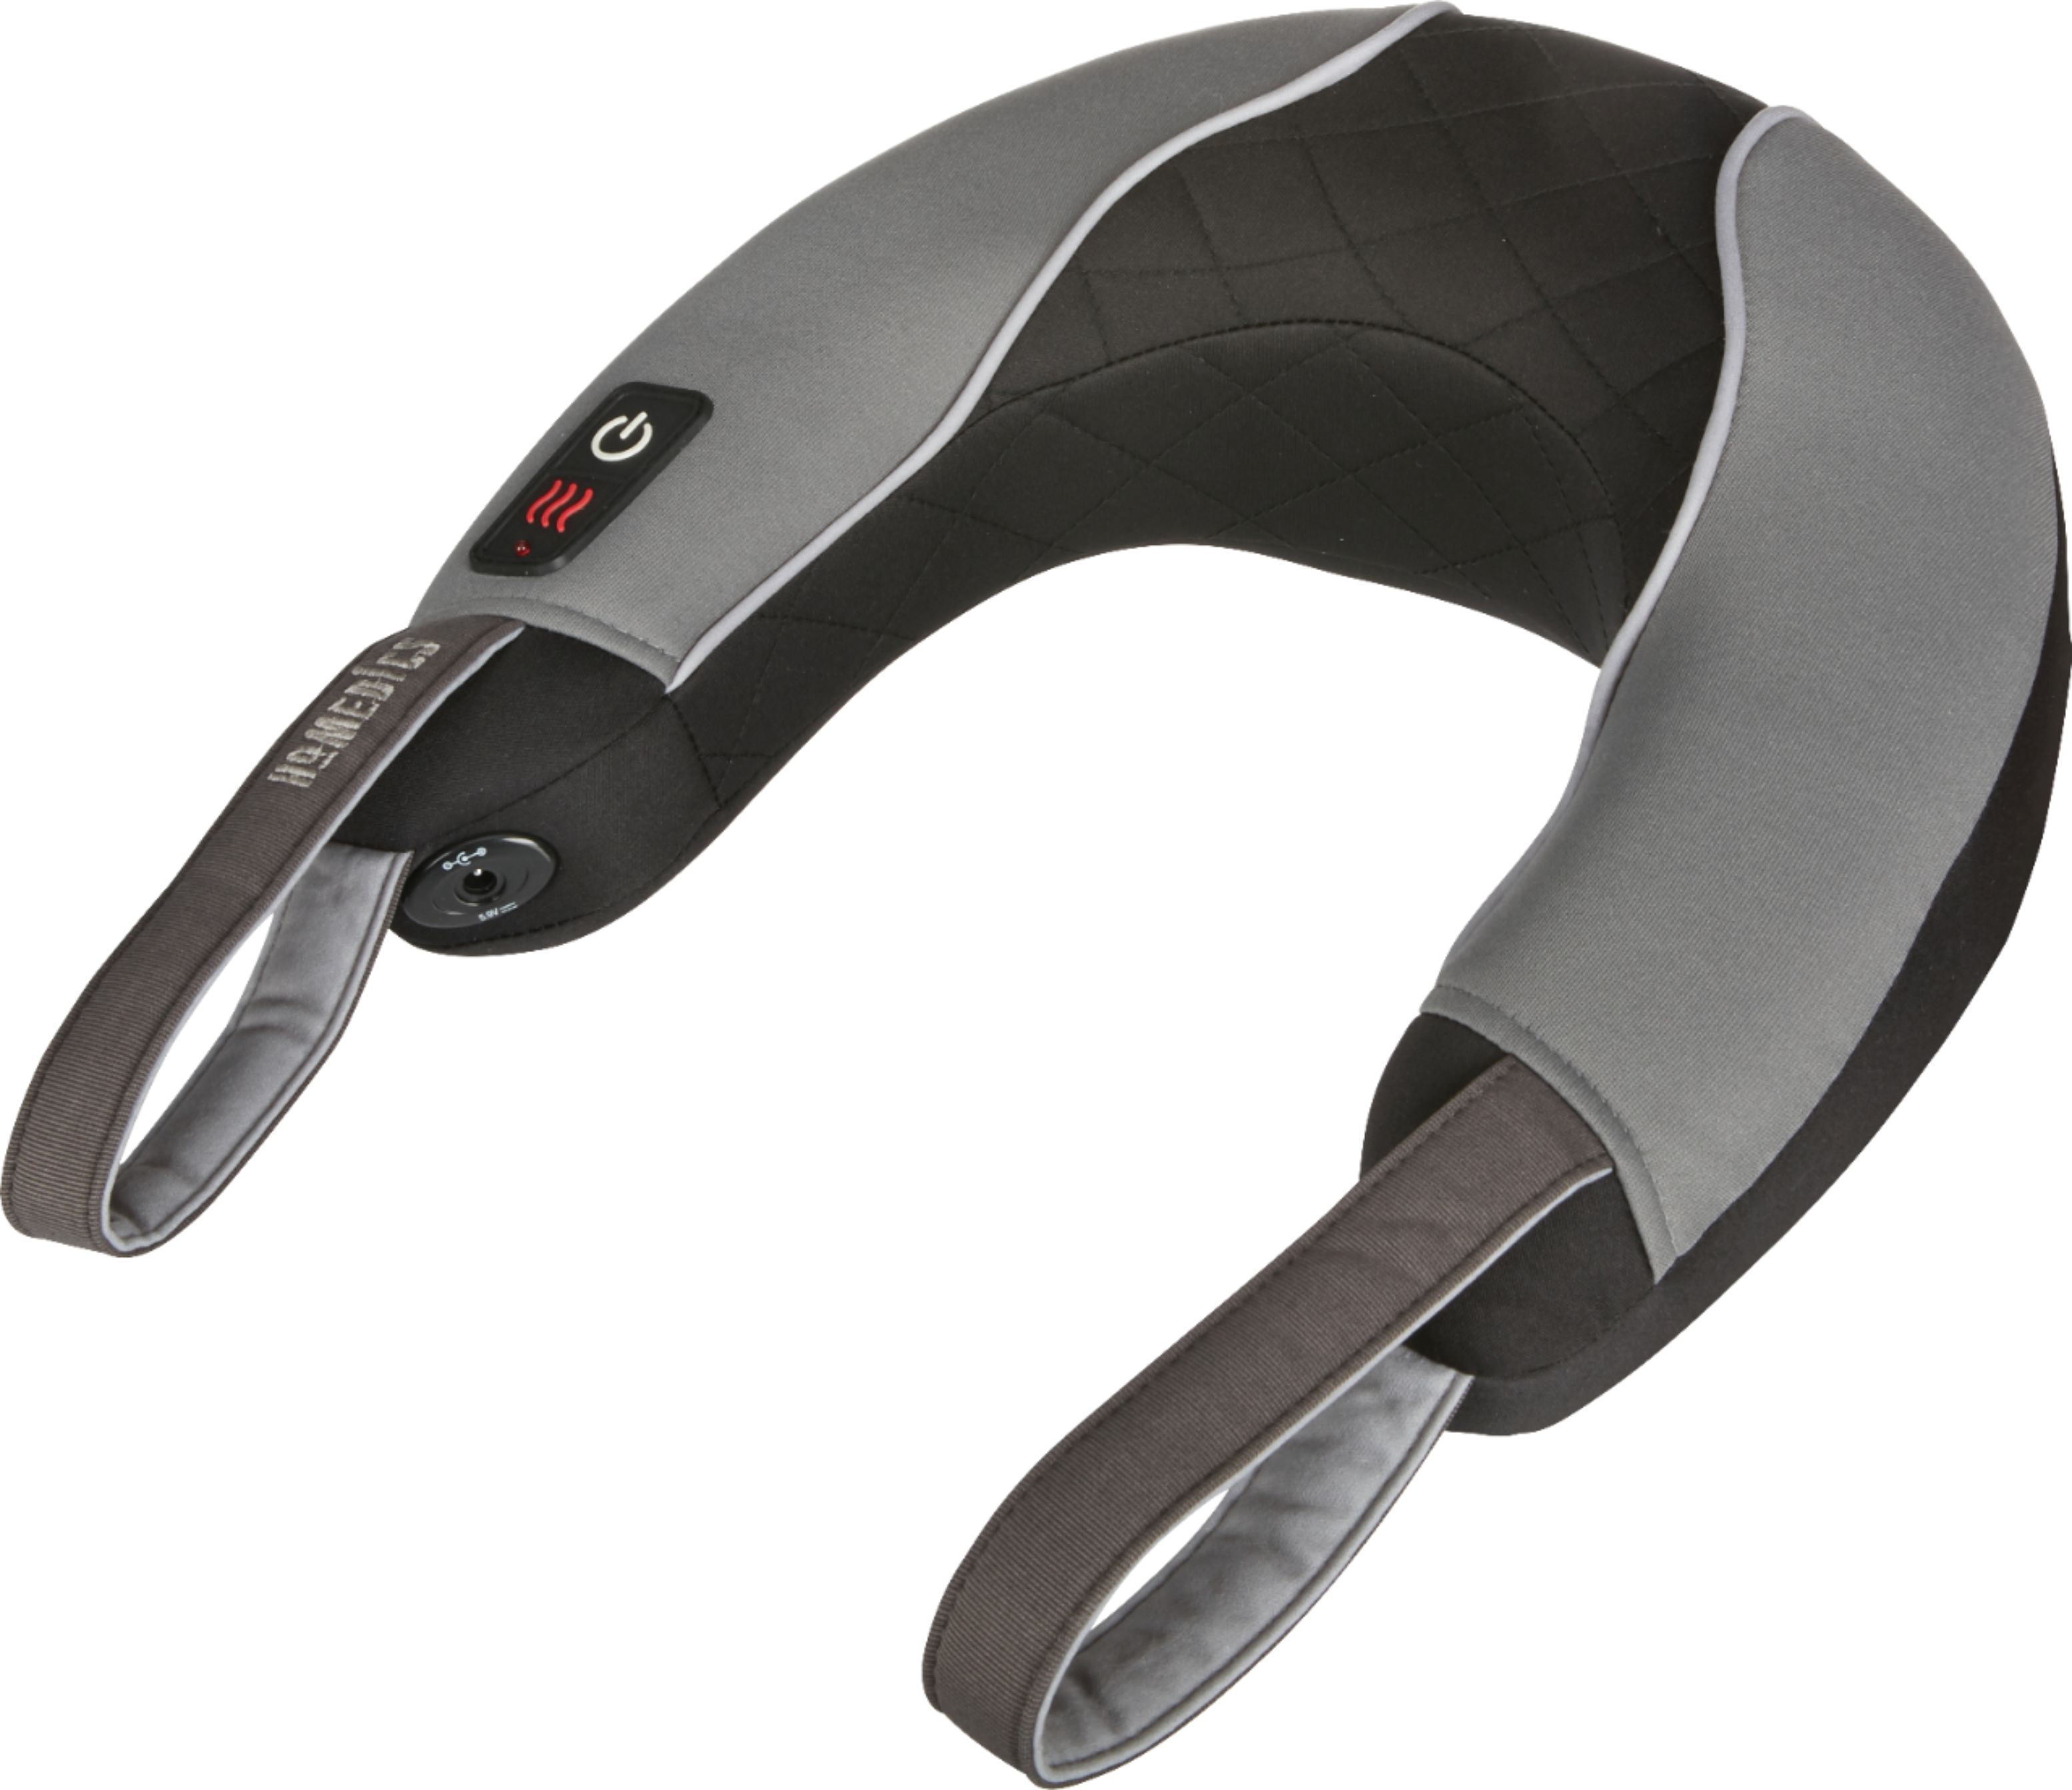 HoMedics Pro Therapy Vibration Neck Massager with Heat Black/Gray NMSQ-217HJ - Best Buy | Best Buy U.S.